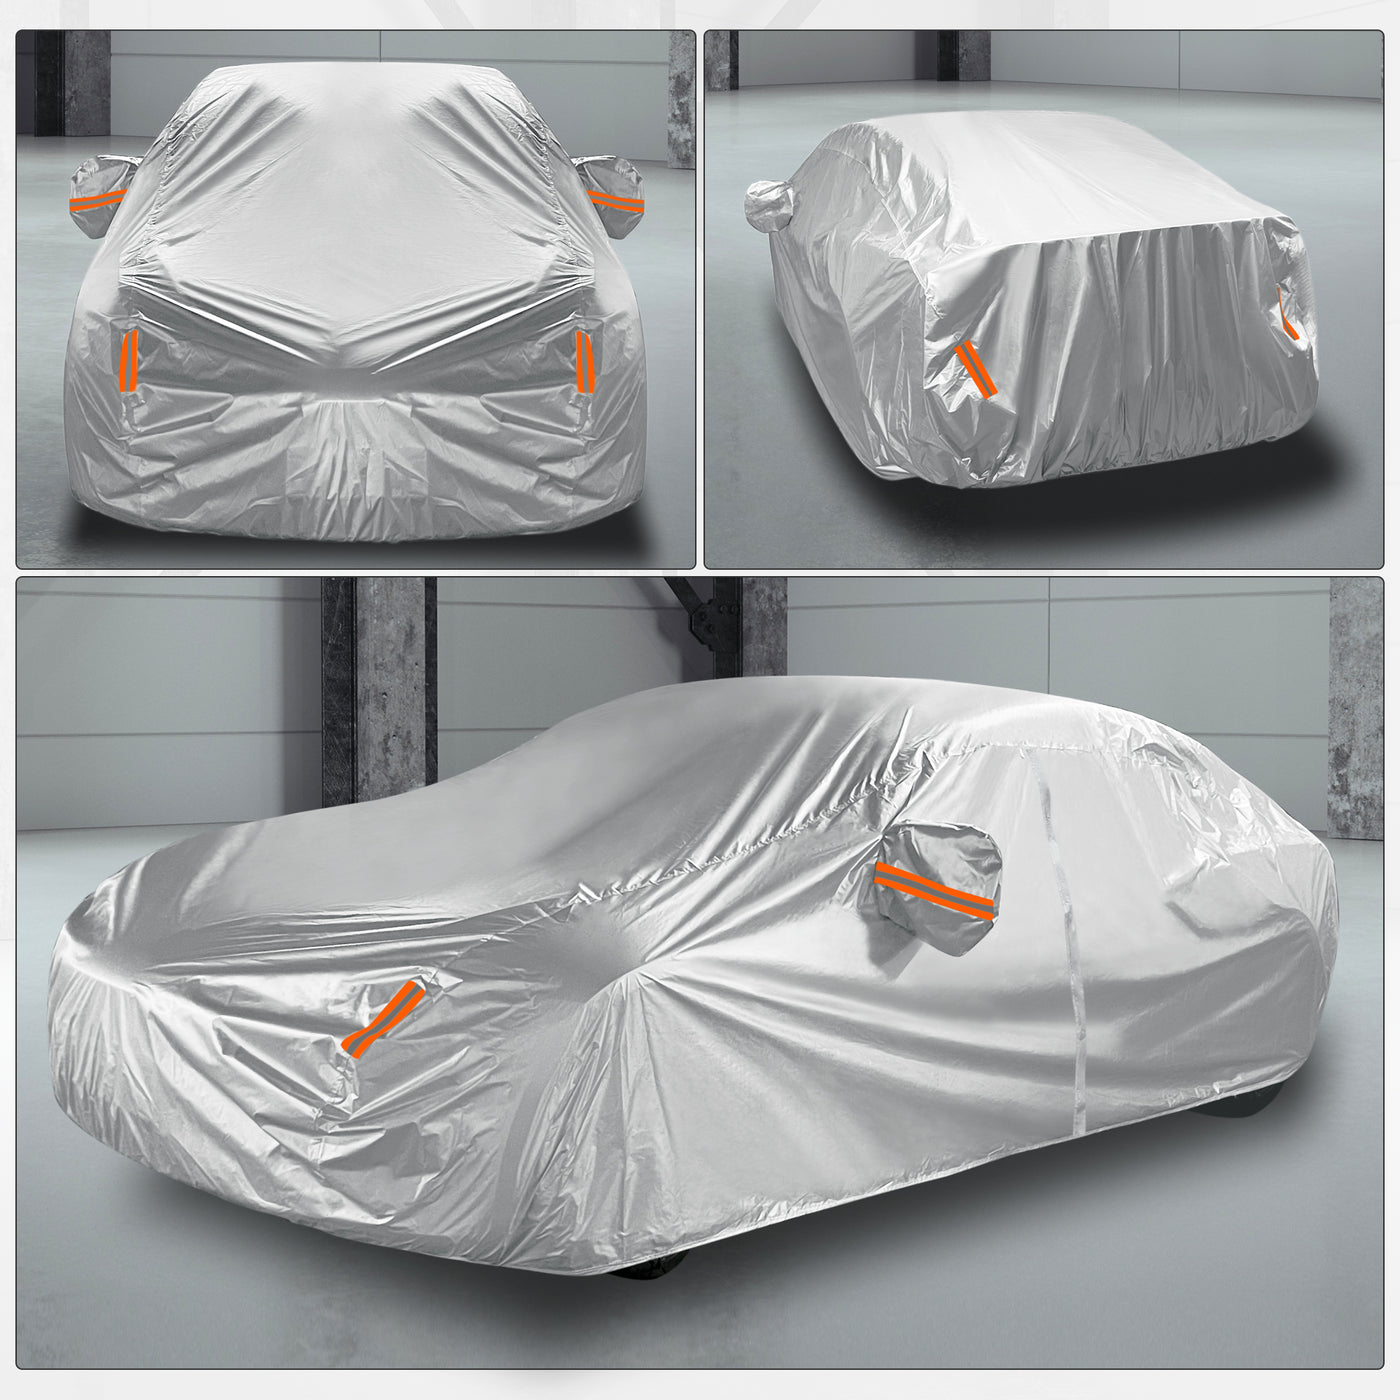 X AUTOHAUX Car Cover Full Car Custom Fit for Tesla S Model S 2012-2022 Waterproof Dustproof Windproof Snow Sun Heat Protection Outdoor All Weather Accessories 190T